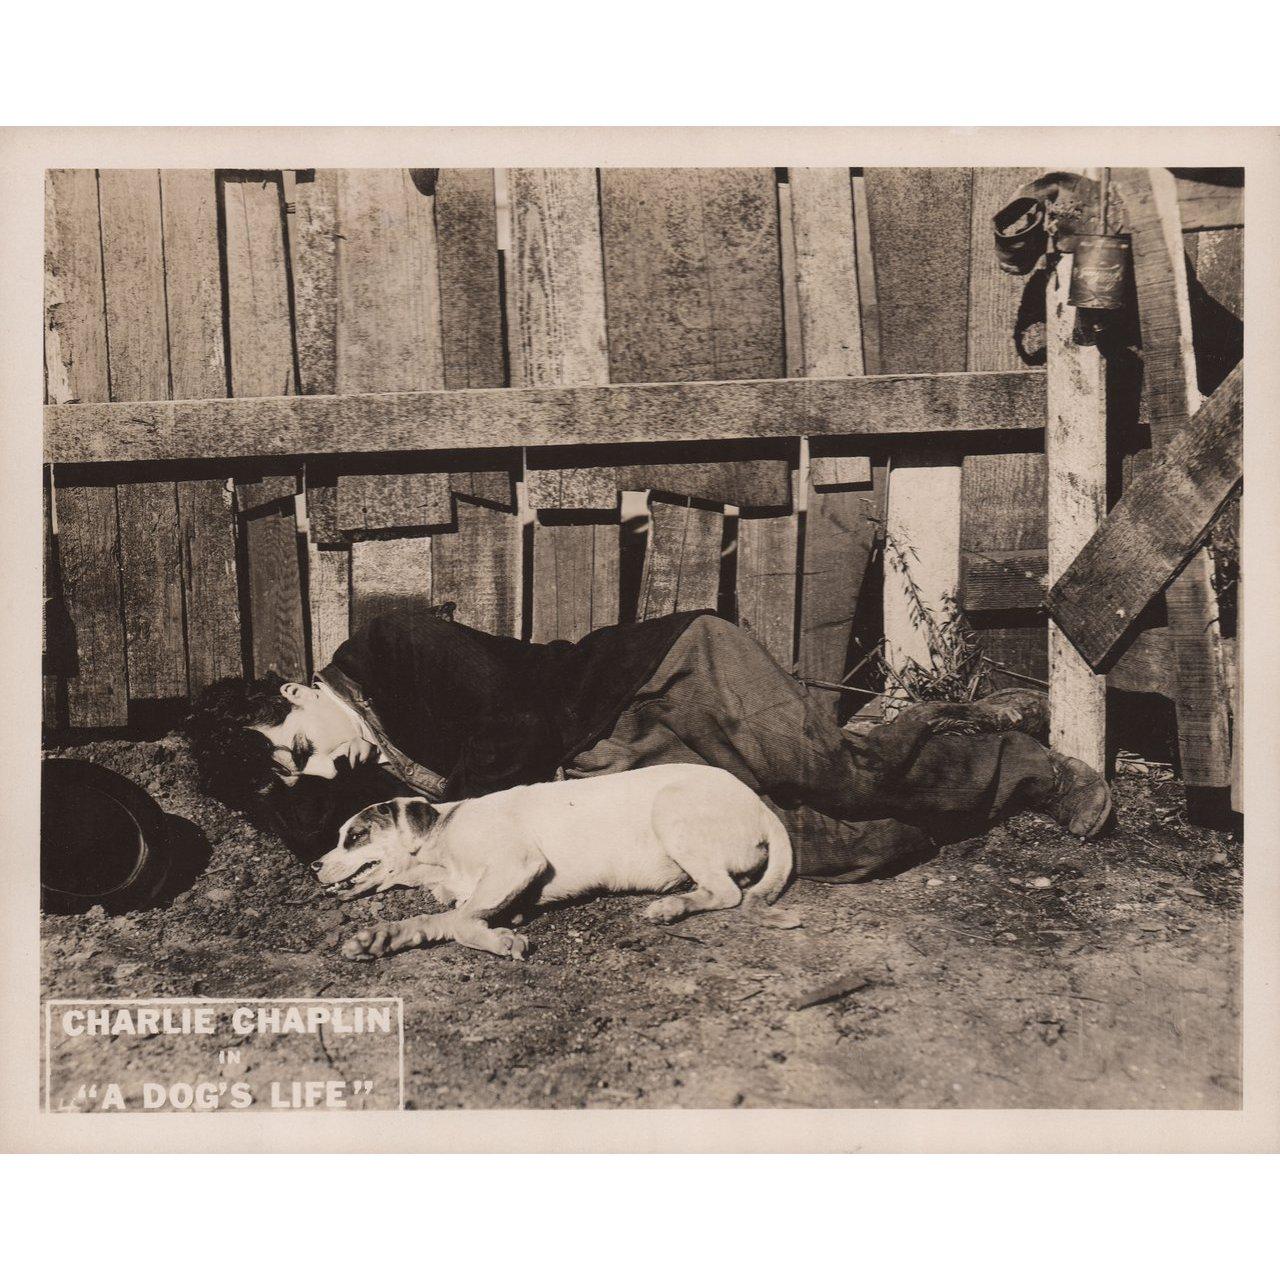 Original 1918 U.S. scene card for the film A Dog's Life directed by Charles Chaplin with Charles Chaplin. Very Good-Fine condition. Please note: the size is stated in inches and the actual size can vary by an inch or more.
